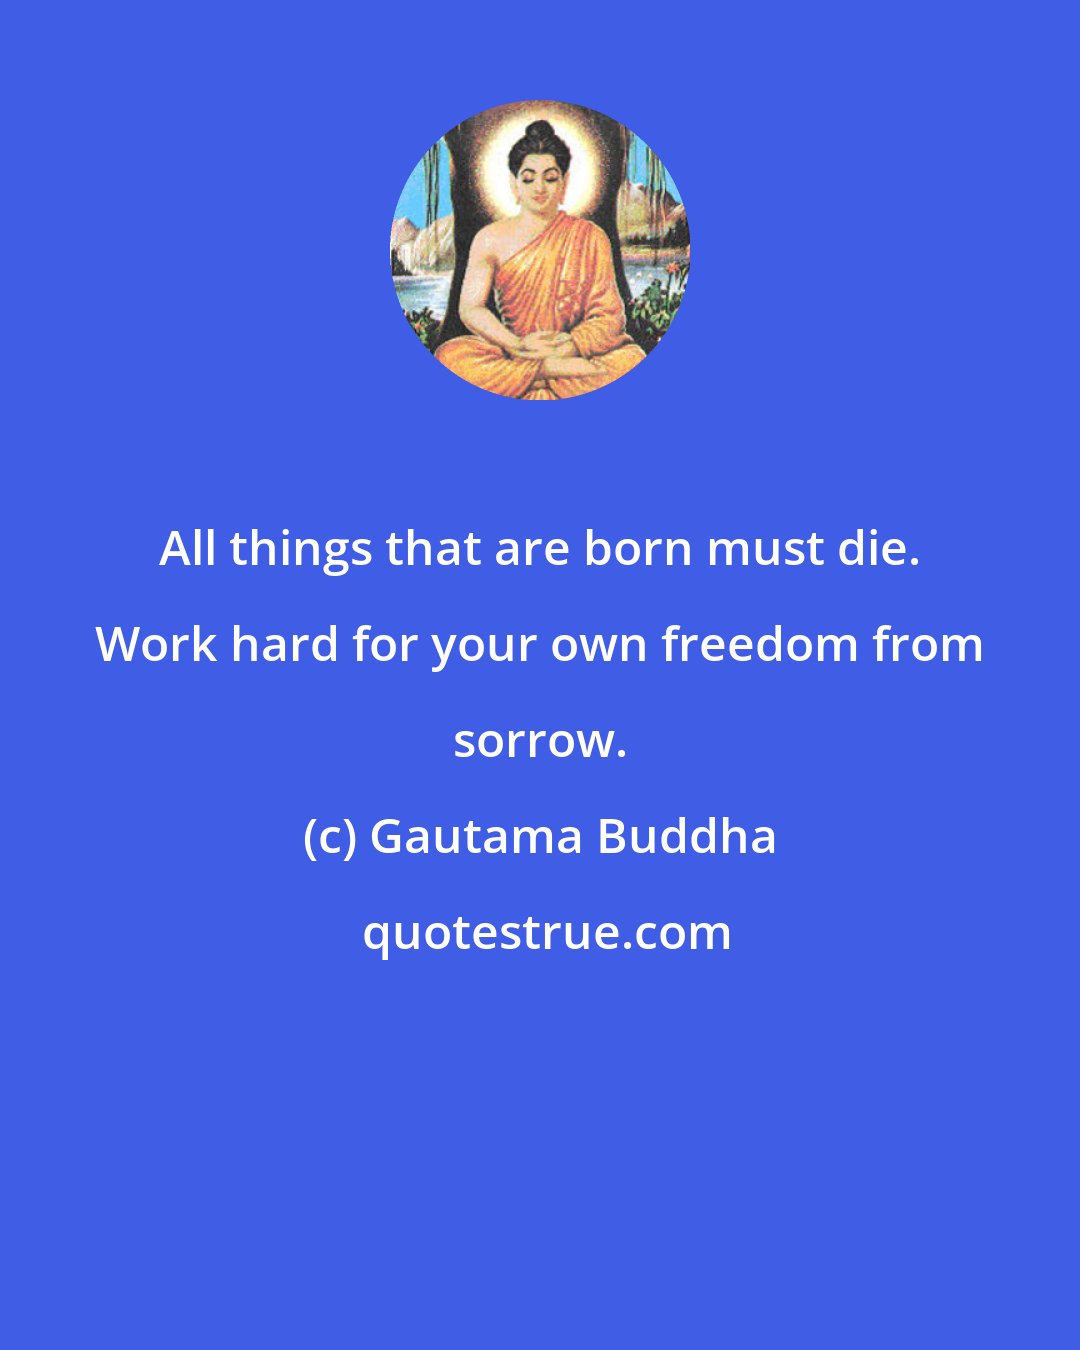 Gautama Buddha: All things that are born must die. Work hard for your own freedom from sorrow.